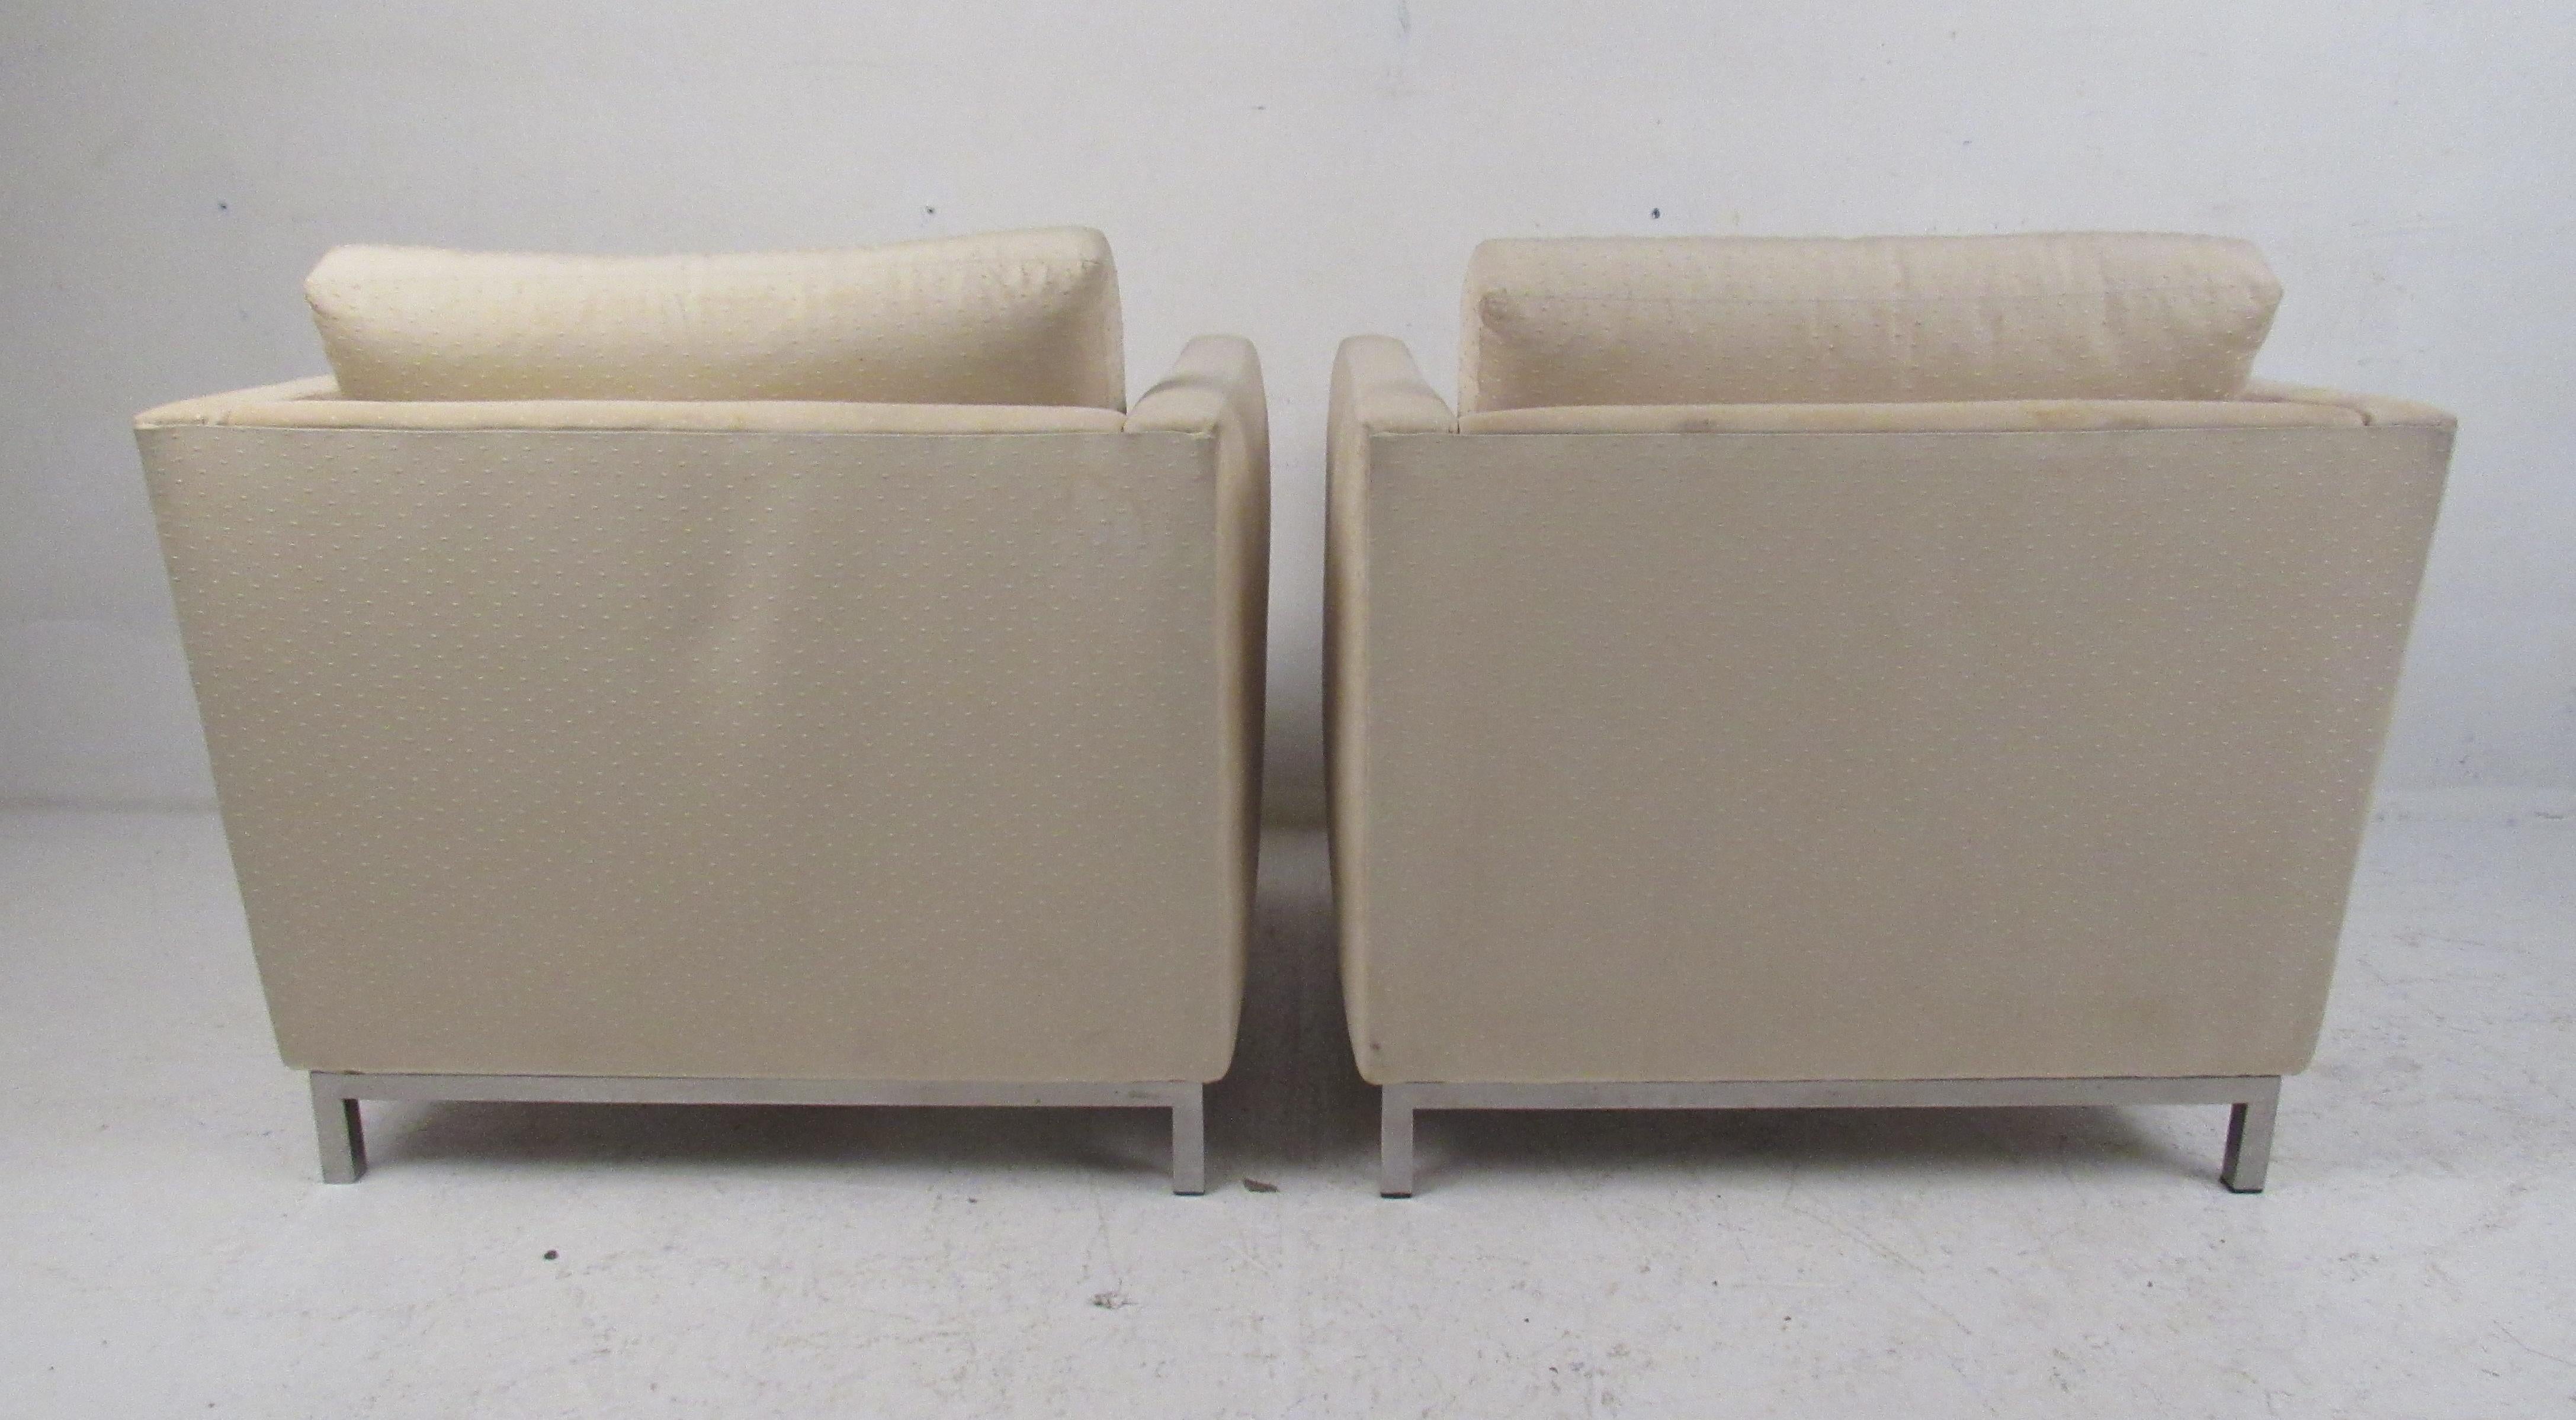 Pair of Mid-Century Modern Club Chairs In Good Condition For Sale In Brooklyn, NY